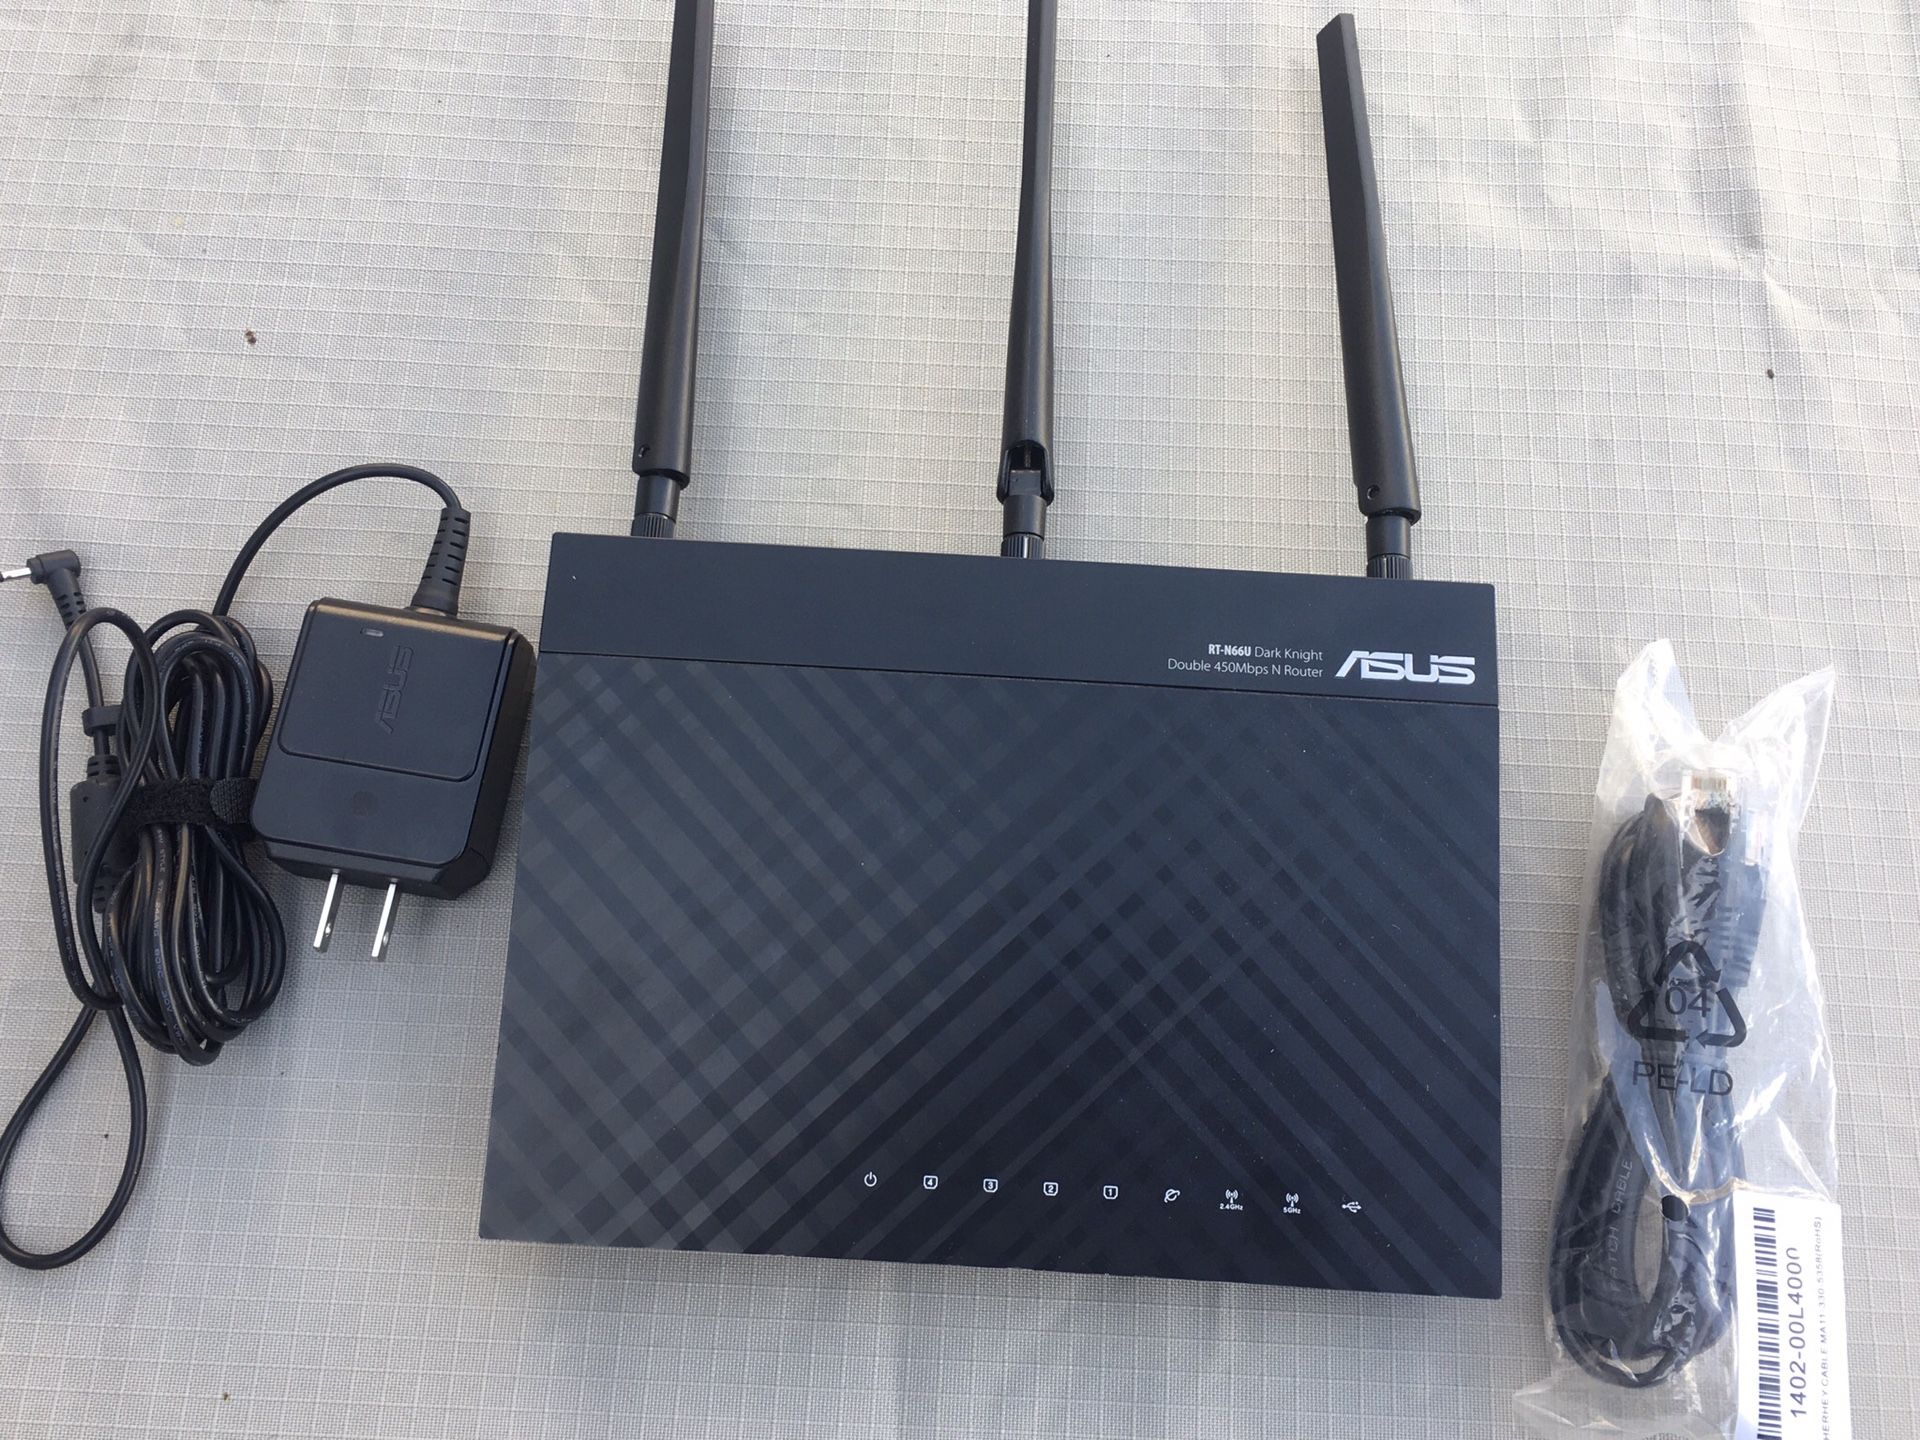 Asus Dual Band Wireless Router